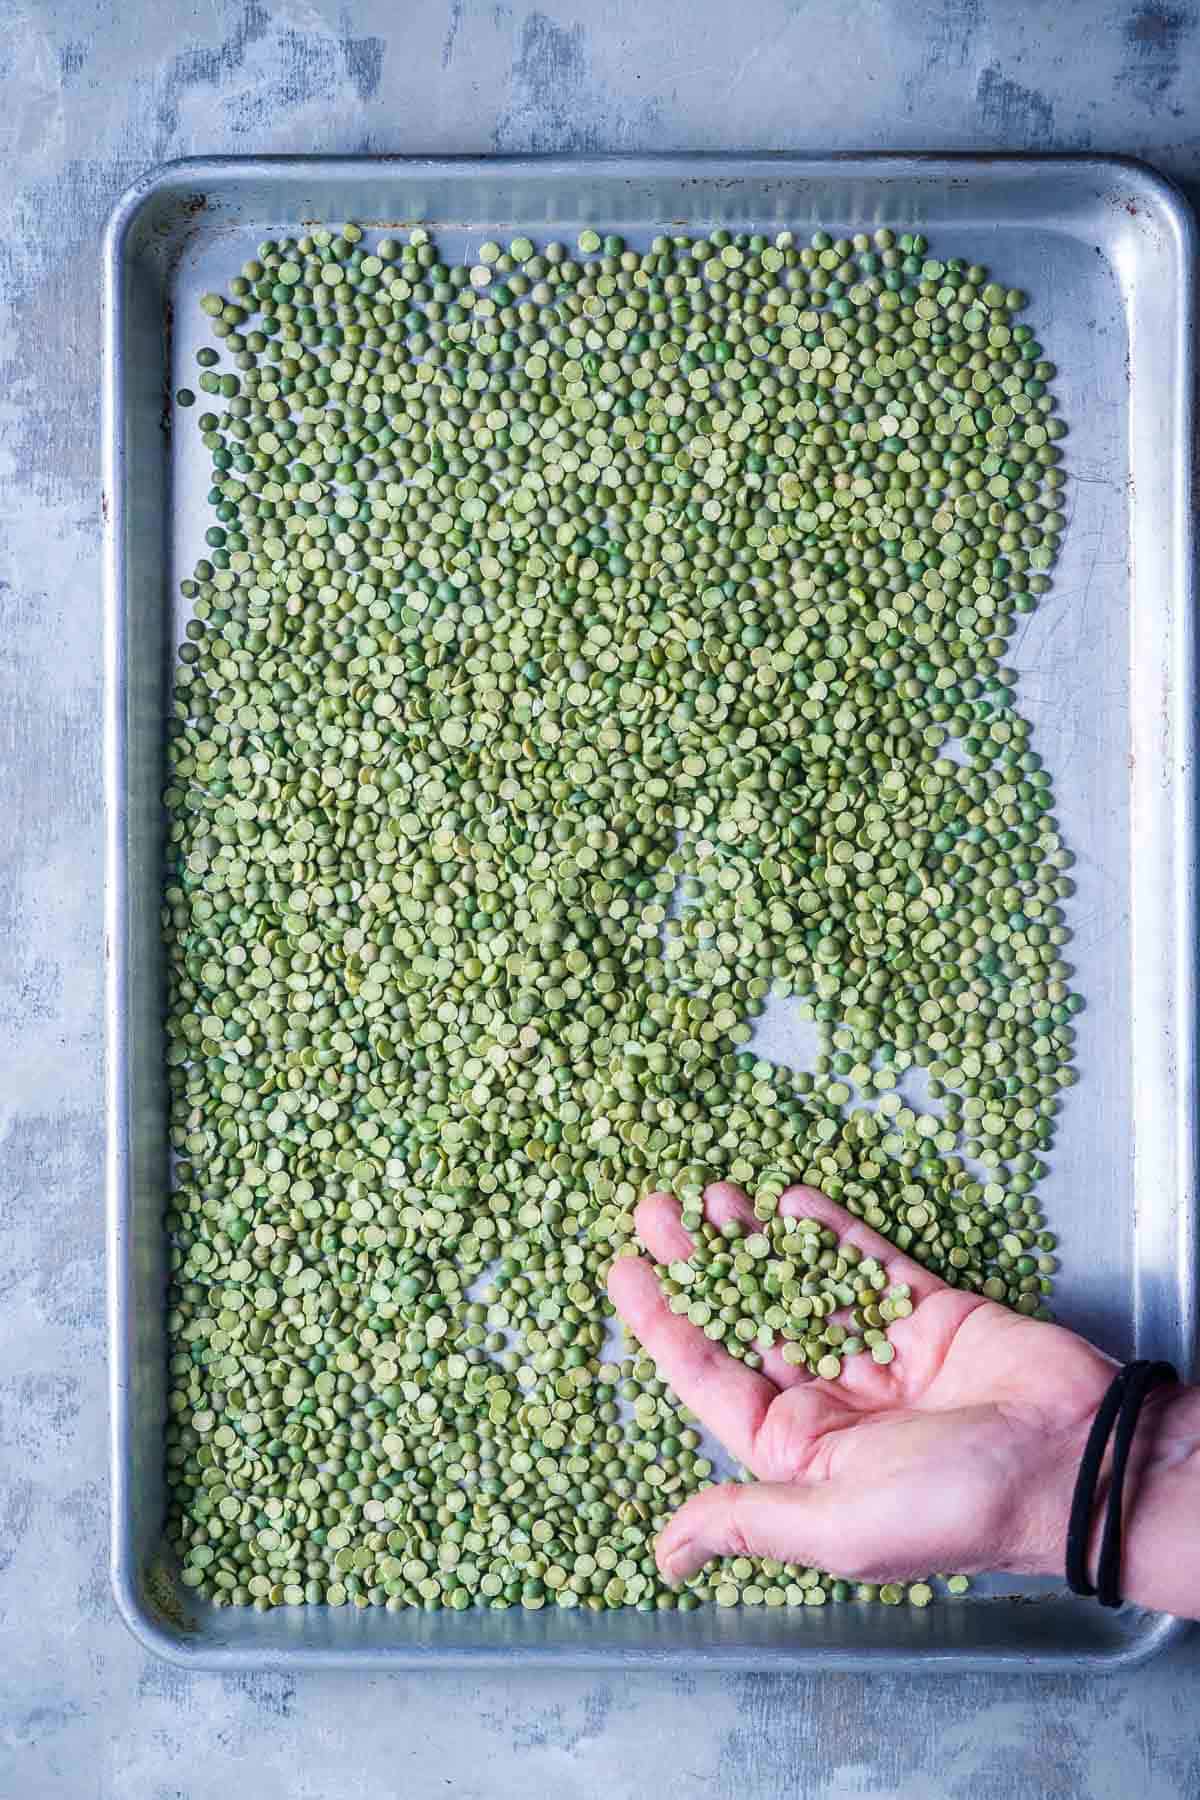 dried green split peas are sorted by hand on a sheet pan